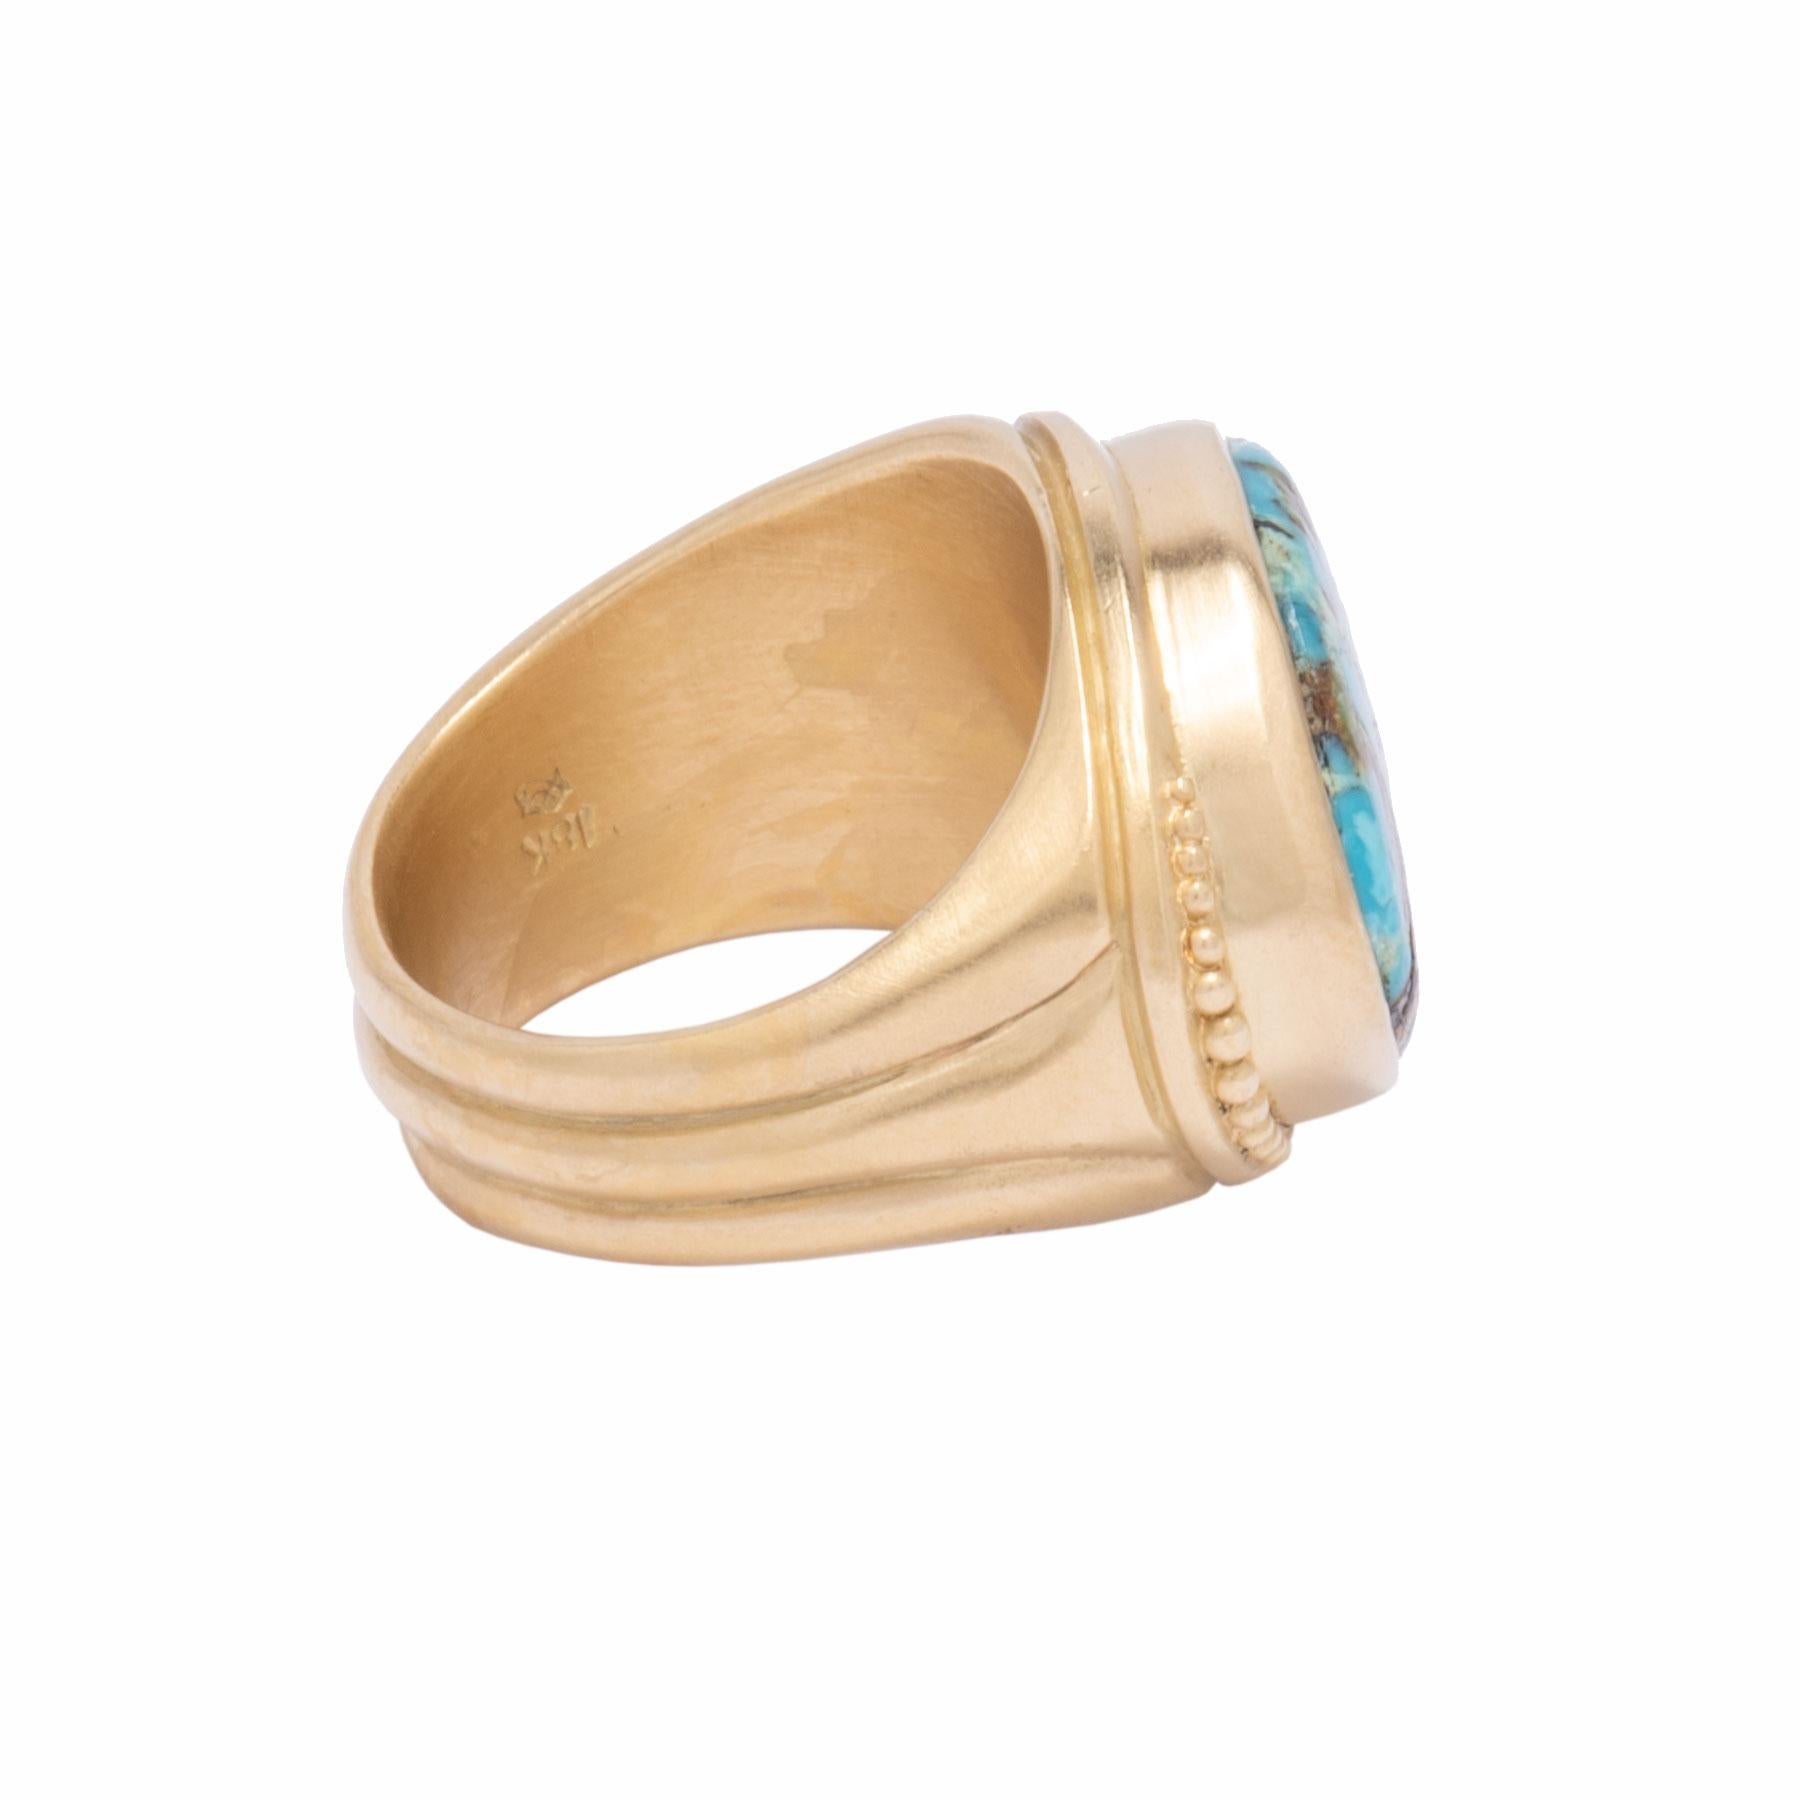 Blue Diamond Turquoise Signet Ring in 18 Karat Gold In New Condition For Sale In Santa Fe, NM